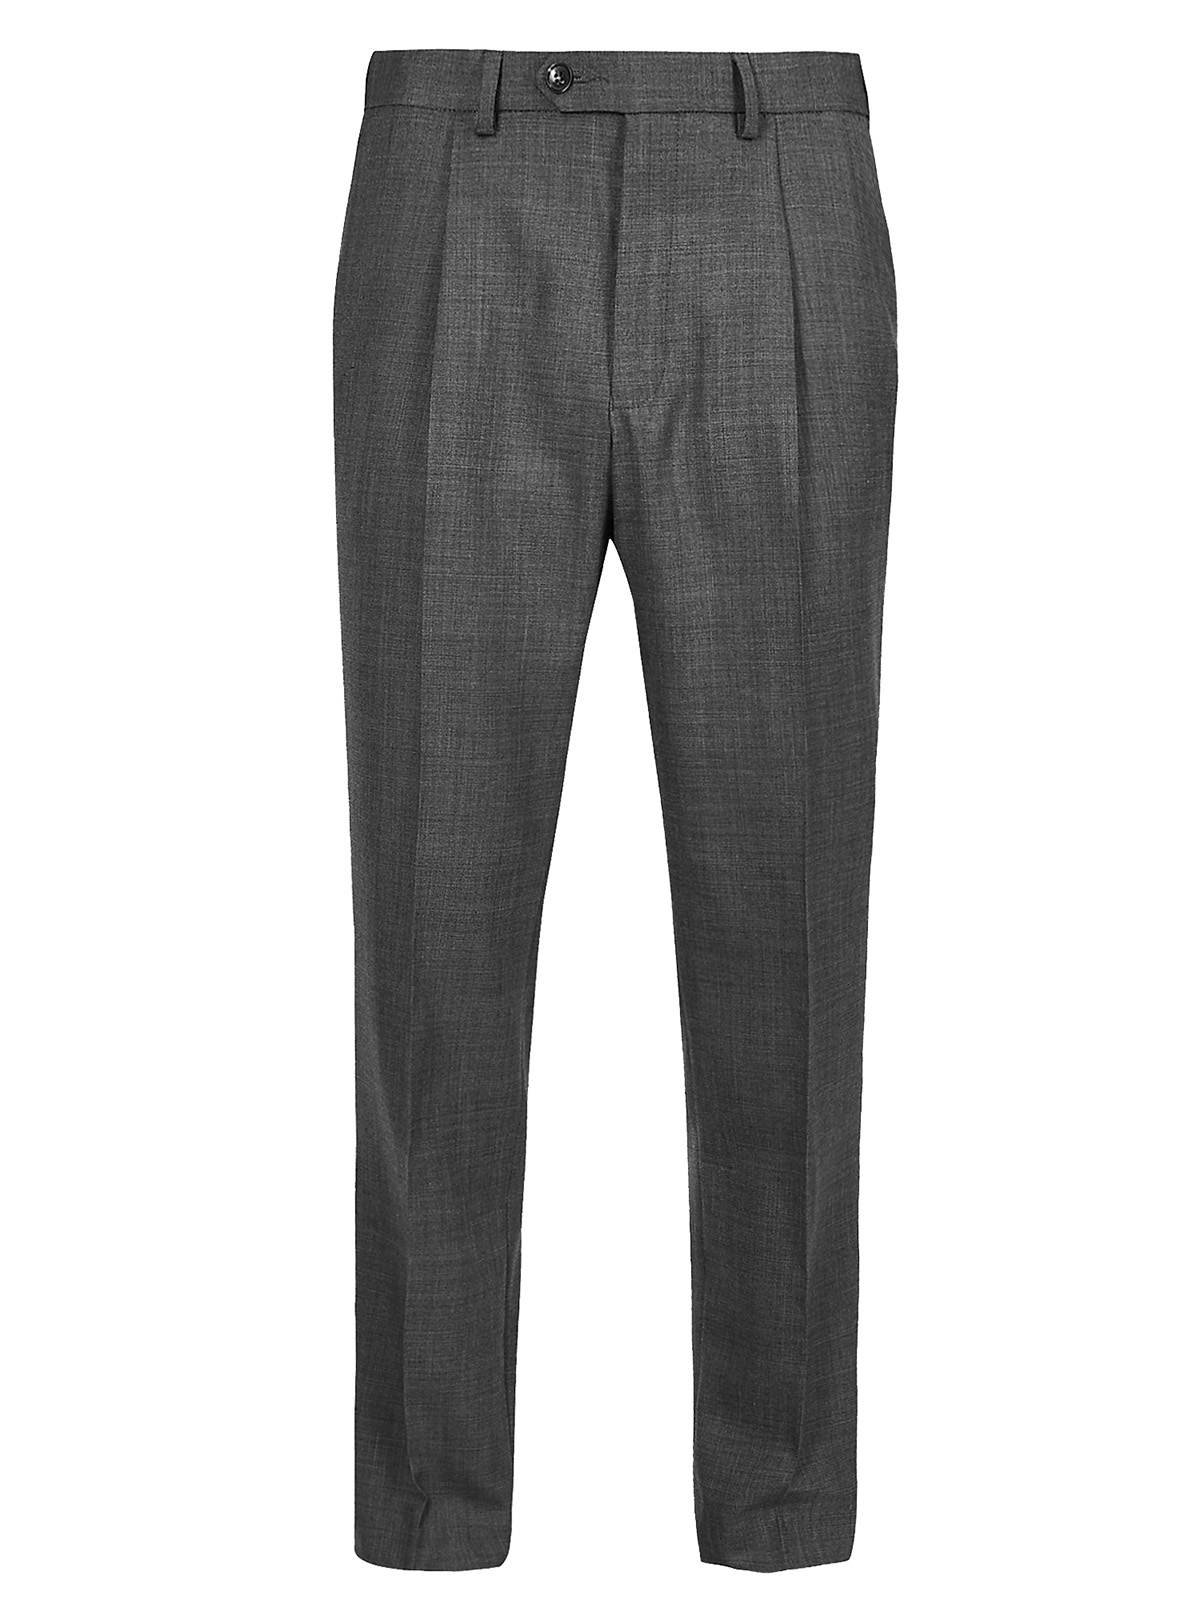 Marks and Spencer - - M&5 GREY Mens Tailored Wool Blend Single Pleat